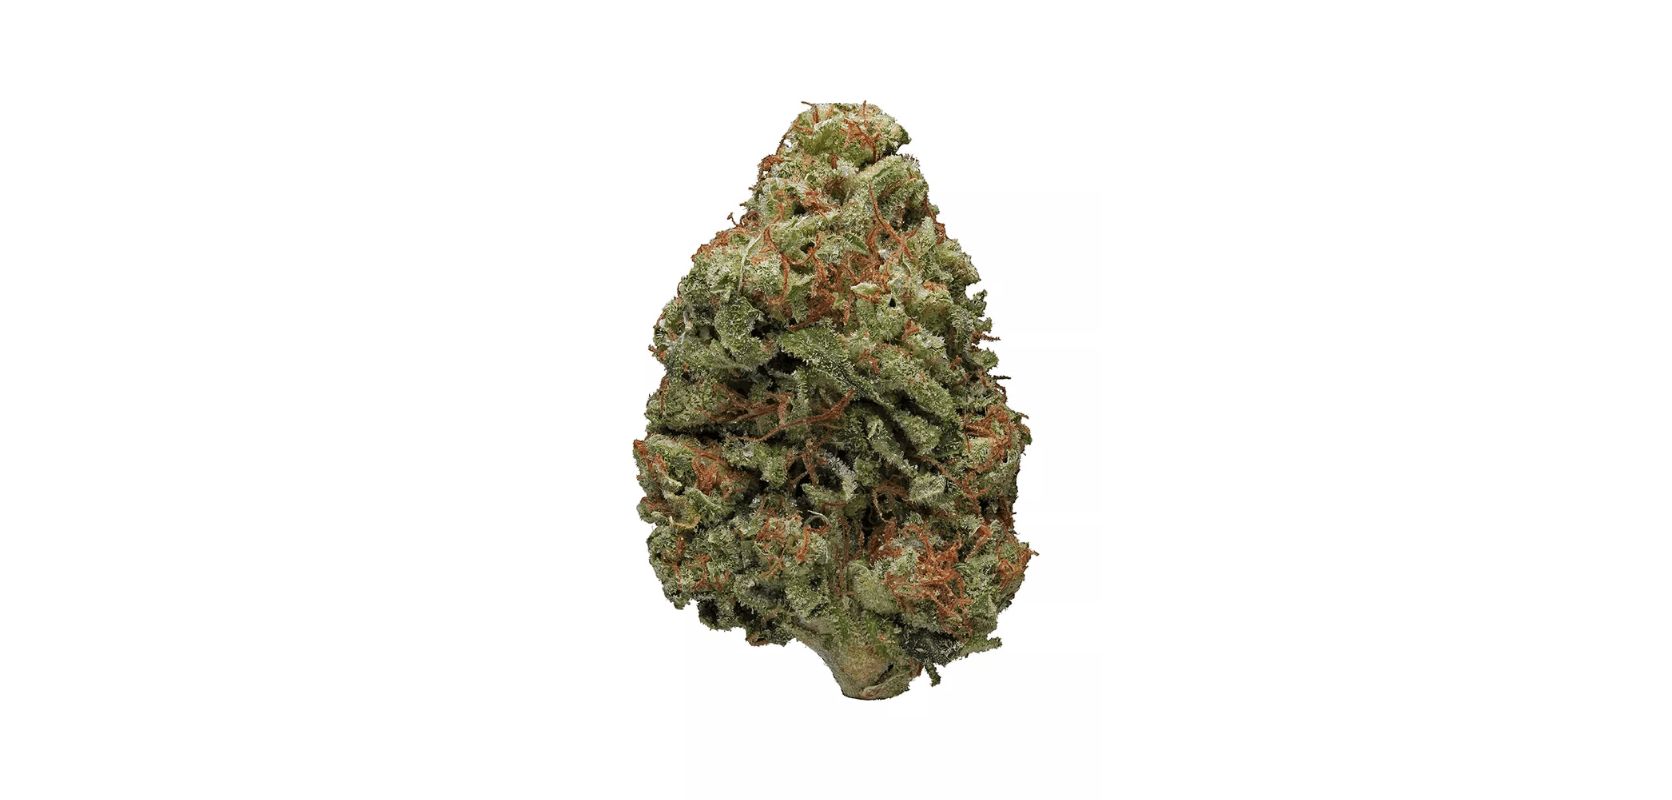 Let's talk about the Bruce Banner strain and its appearance. If you're a fan of big, beautiful buds, then you'll love this strain. 